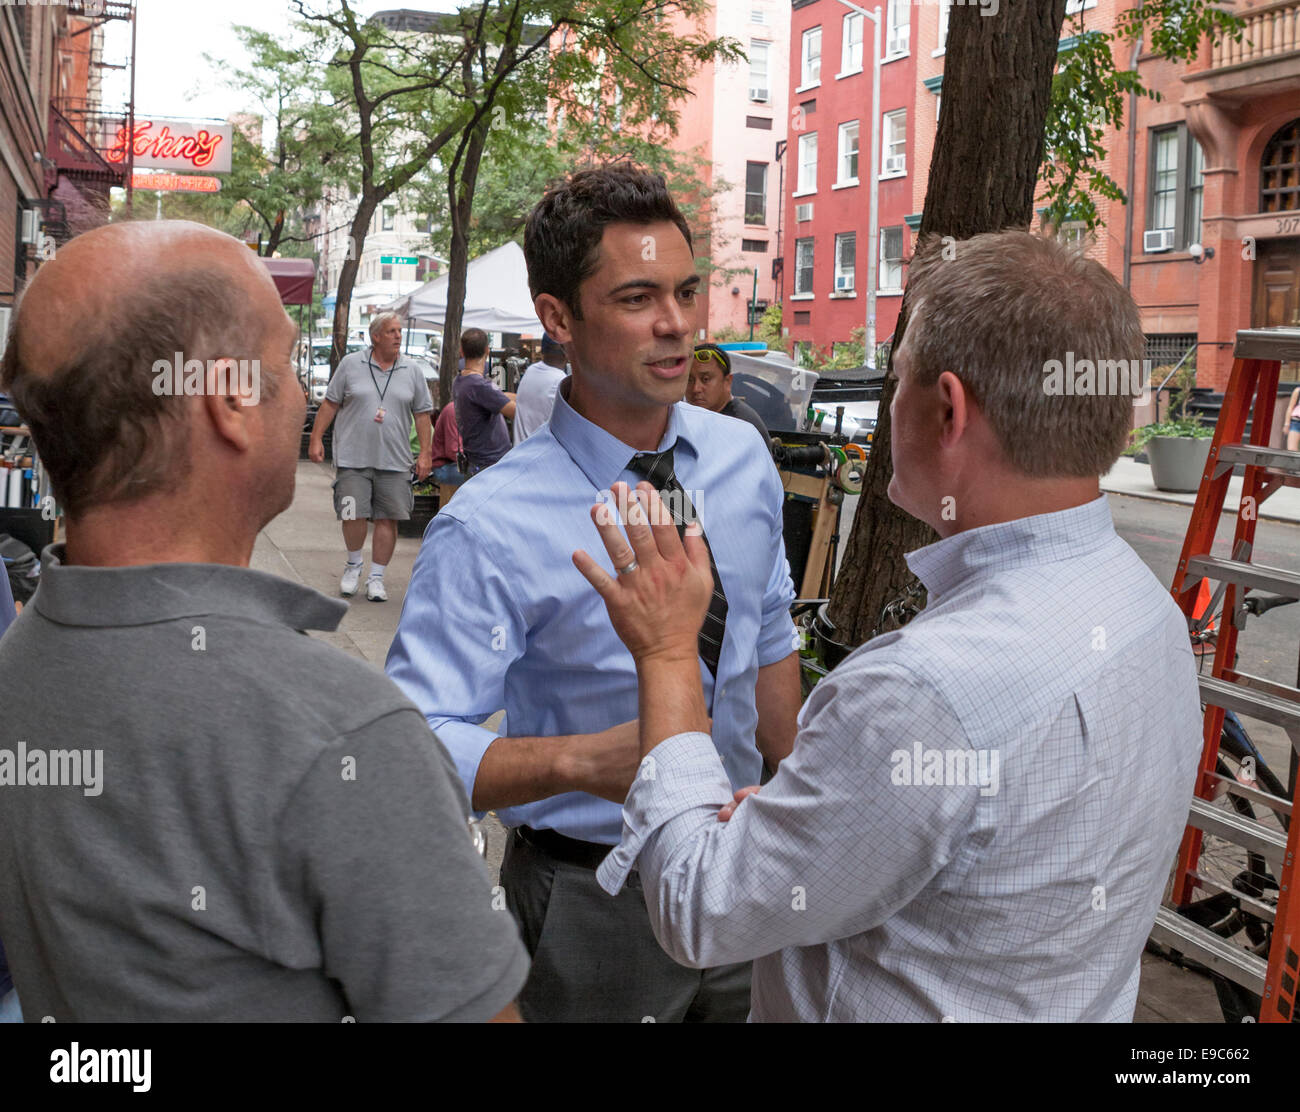 Danny Pino of Law & Order: Special Victims Unit on his way to film a scene for Episode #4 of Season 16. Stock Photo